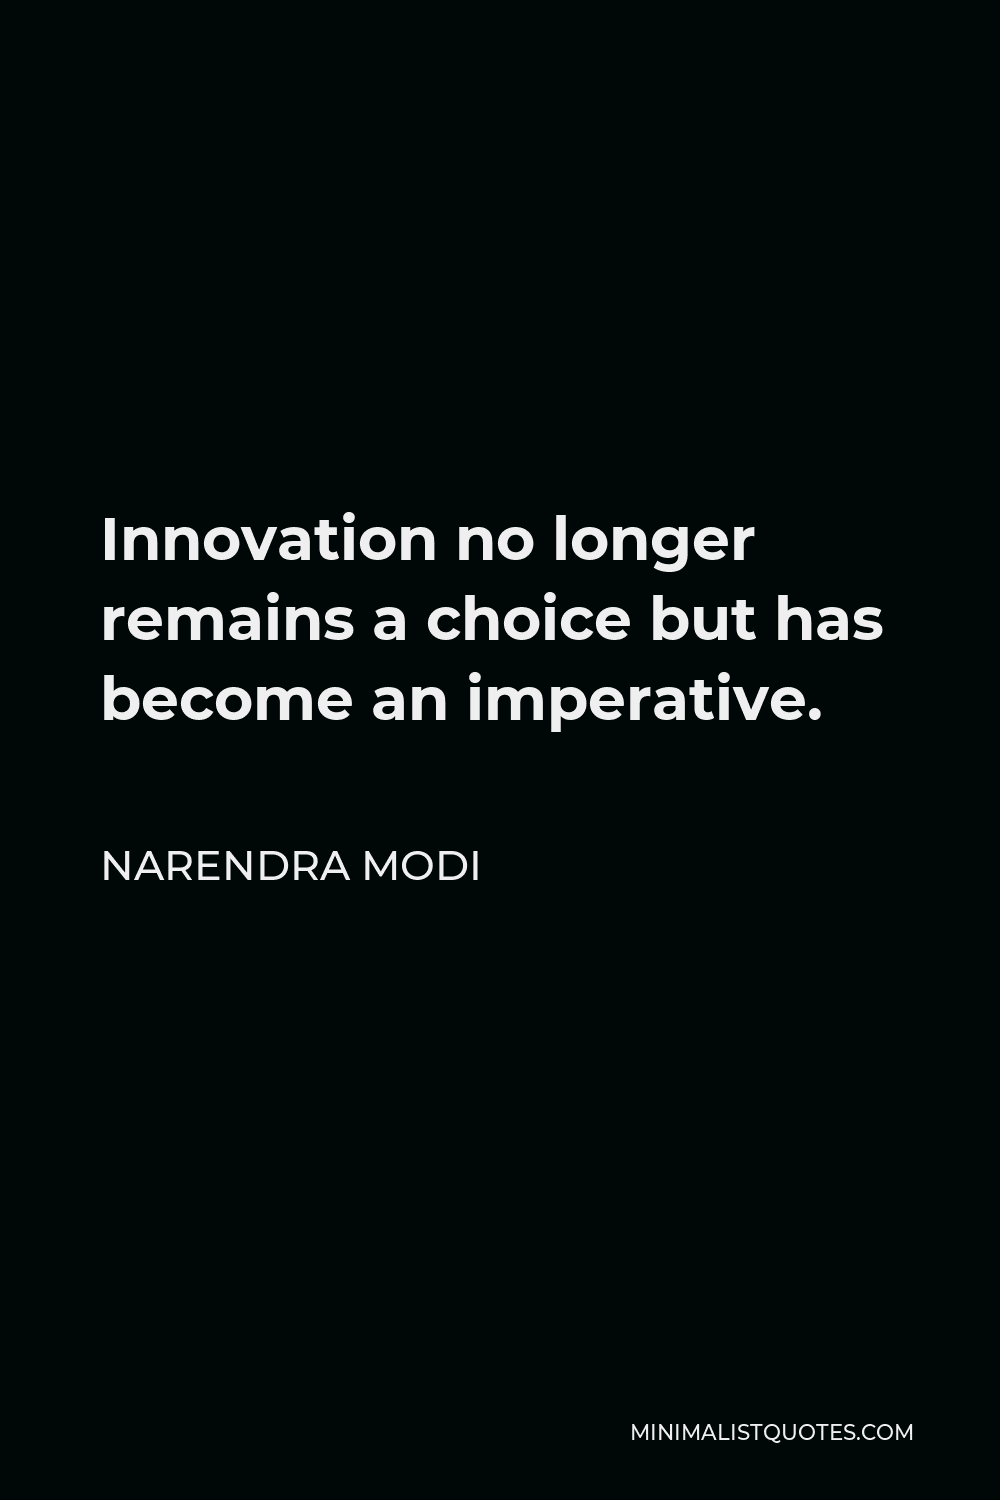 Narendra Modi Quote - Innovation no longer remains a choice but has become an imperative.